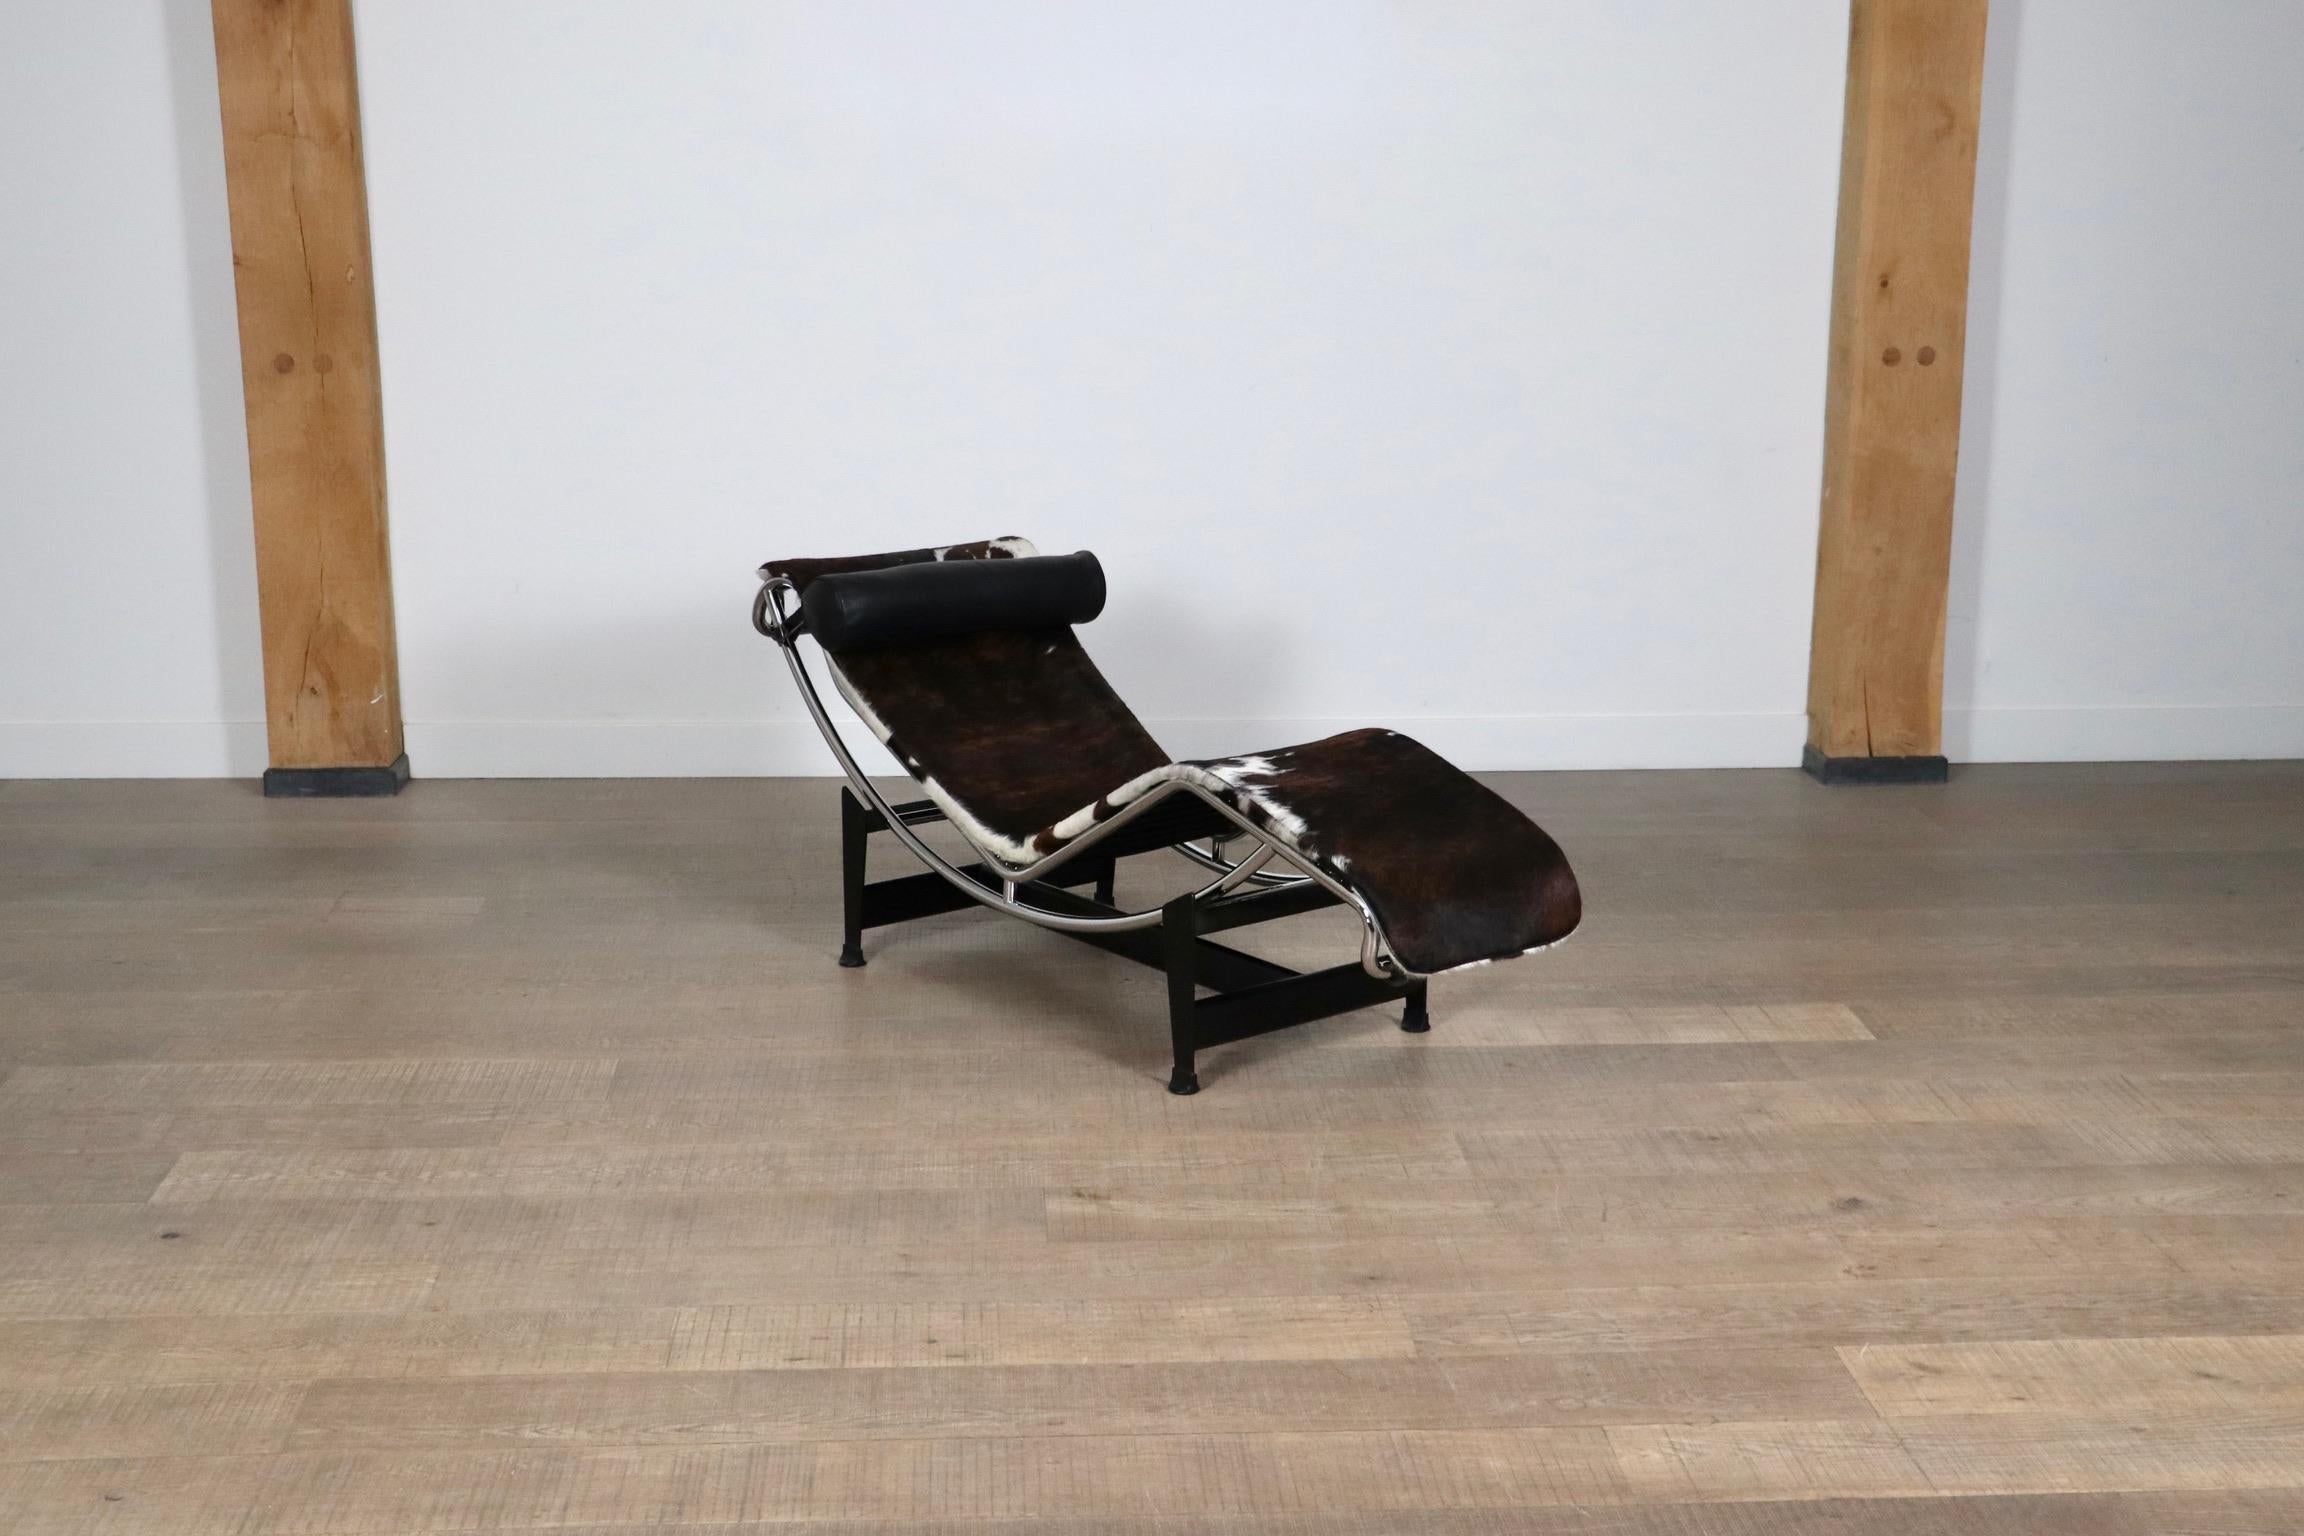 Wonderful chaise longue, model LC4 with nice dark brown spotted ponyskin, designed by Le Corbusier, Pierre Jeanneret and Charlotte Perriand for Cassina in 1965.

The chaise Longue was born from the inspiration of the three design artists who wanted